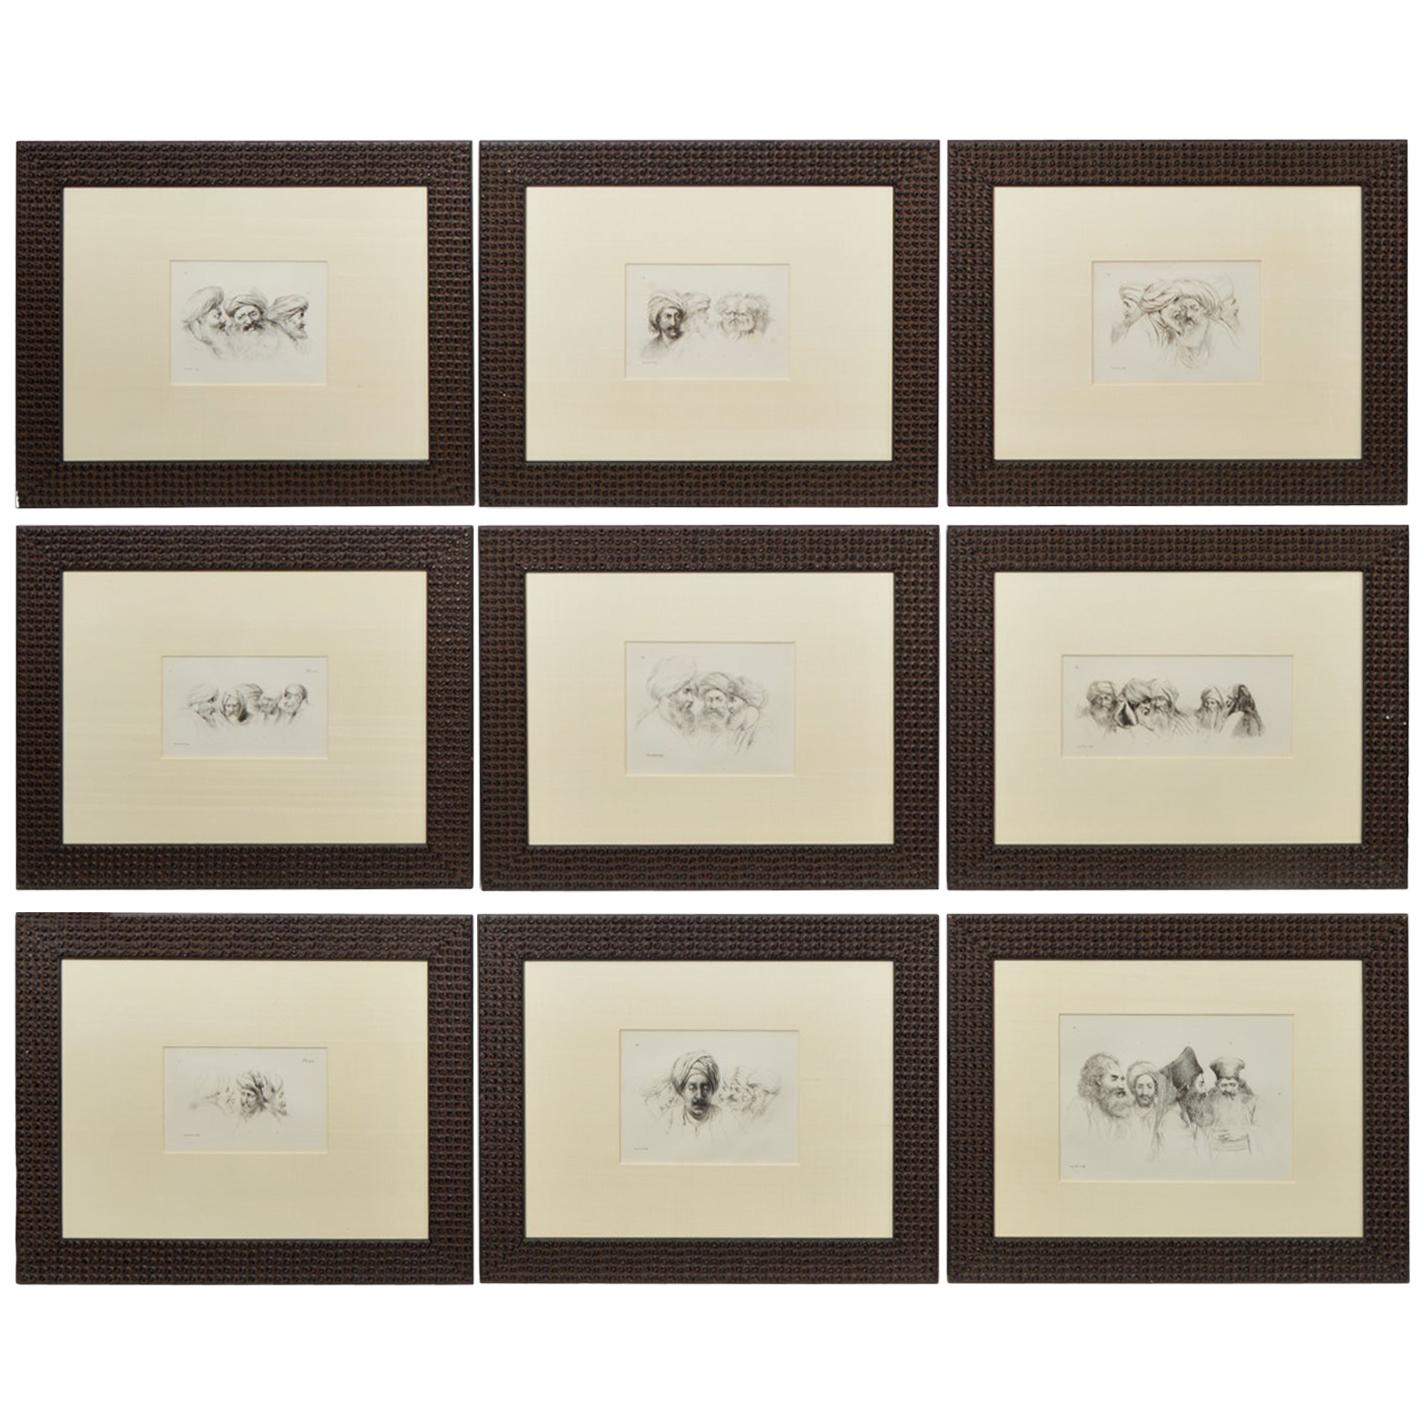 Group of 9 Framed Engraved Egyptology Book Plates by Vivant Denon, Early 20th C.